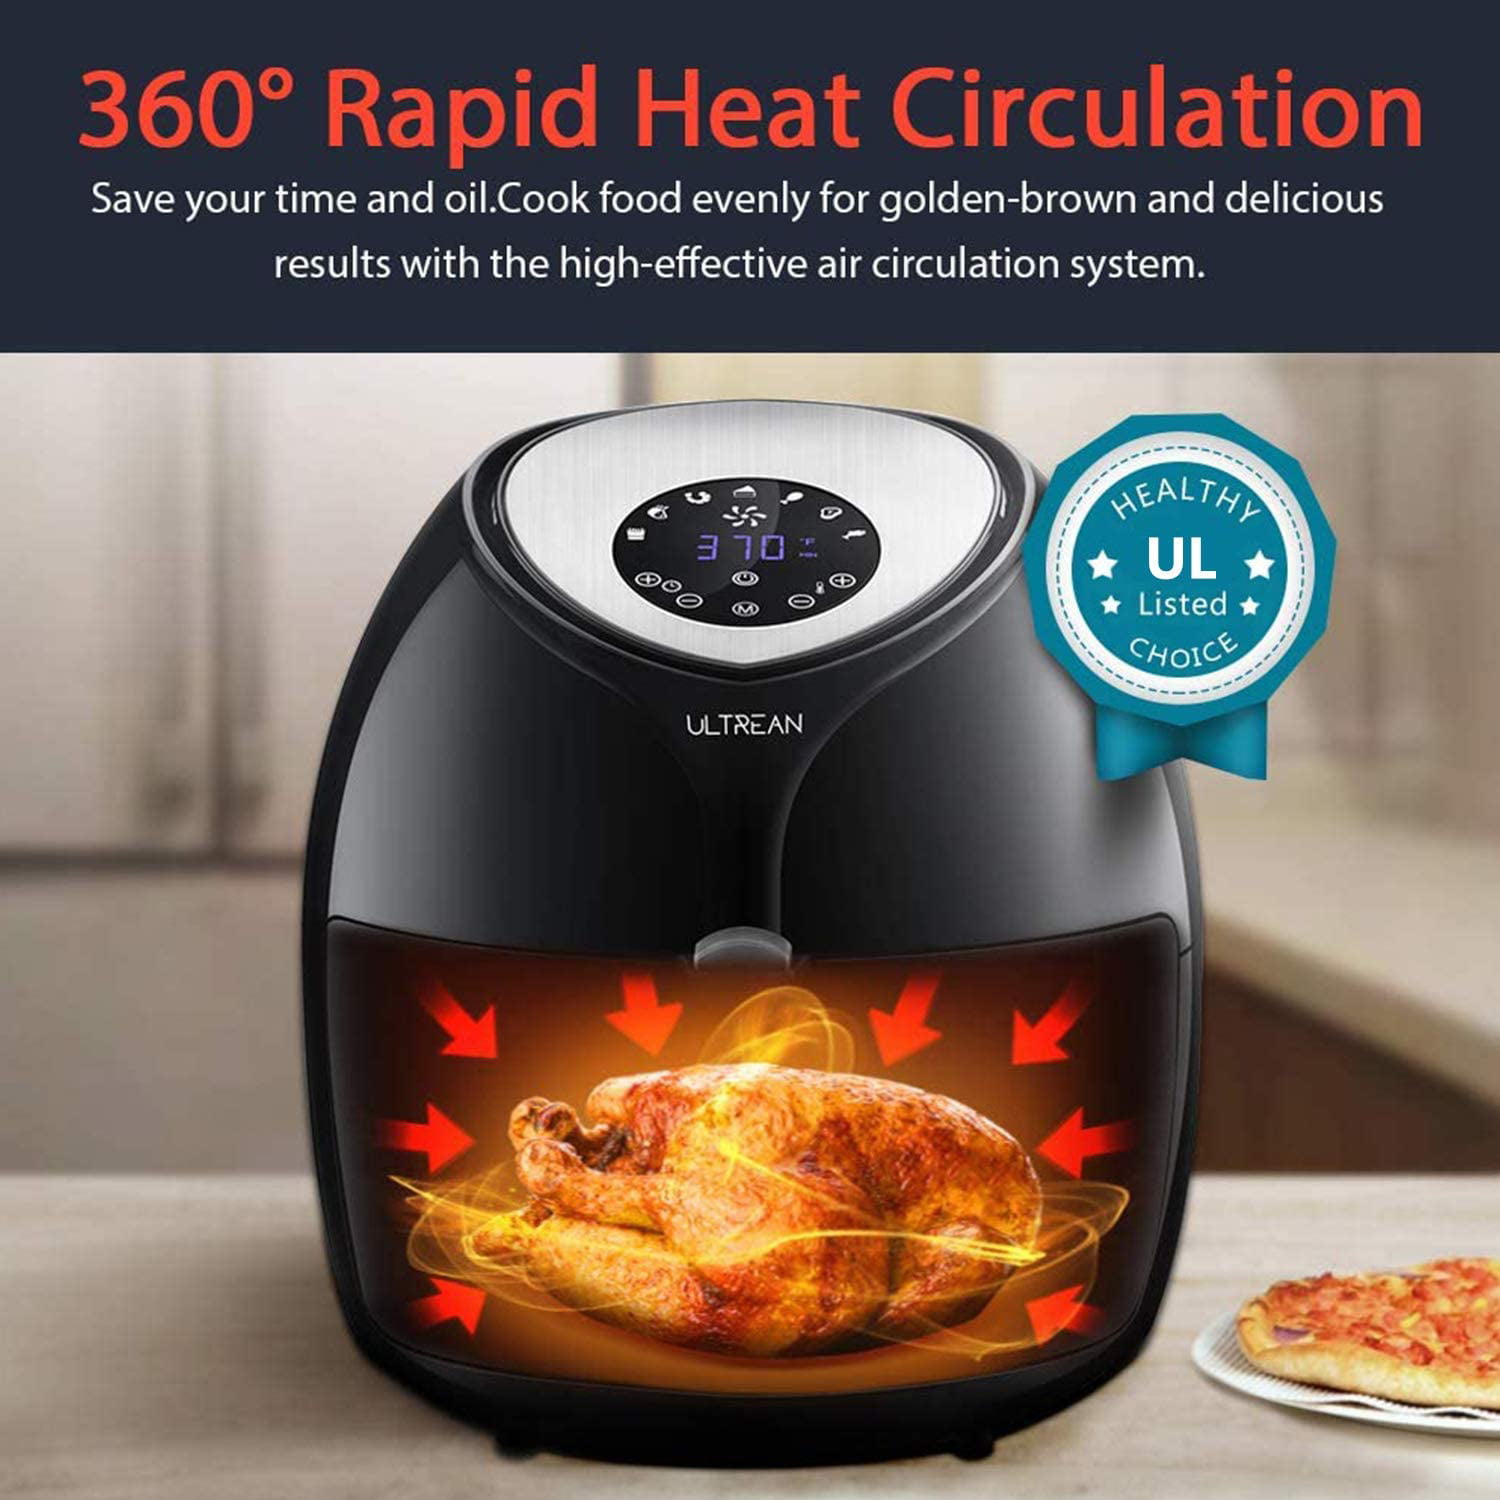 Ultrean Air Fryer, 9 Quart 6-in-1 Electric Hot XL Airfryer Oven Oilless  Cooker, Large Family Size LCD Touch Control Panel and Nonstick Basket, ETL